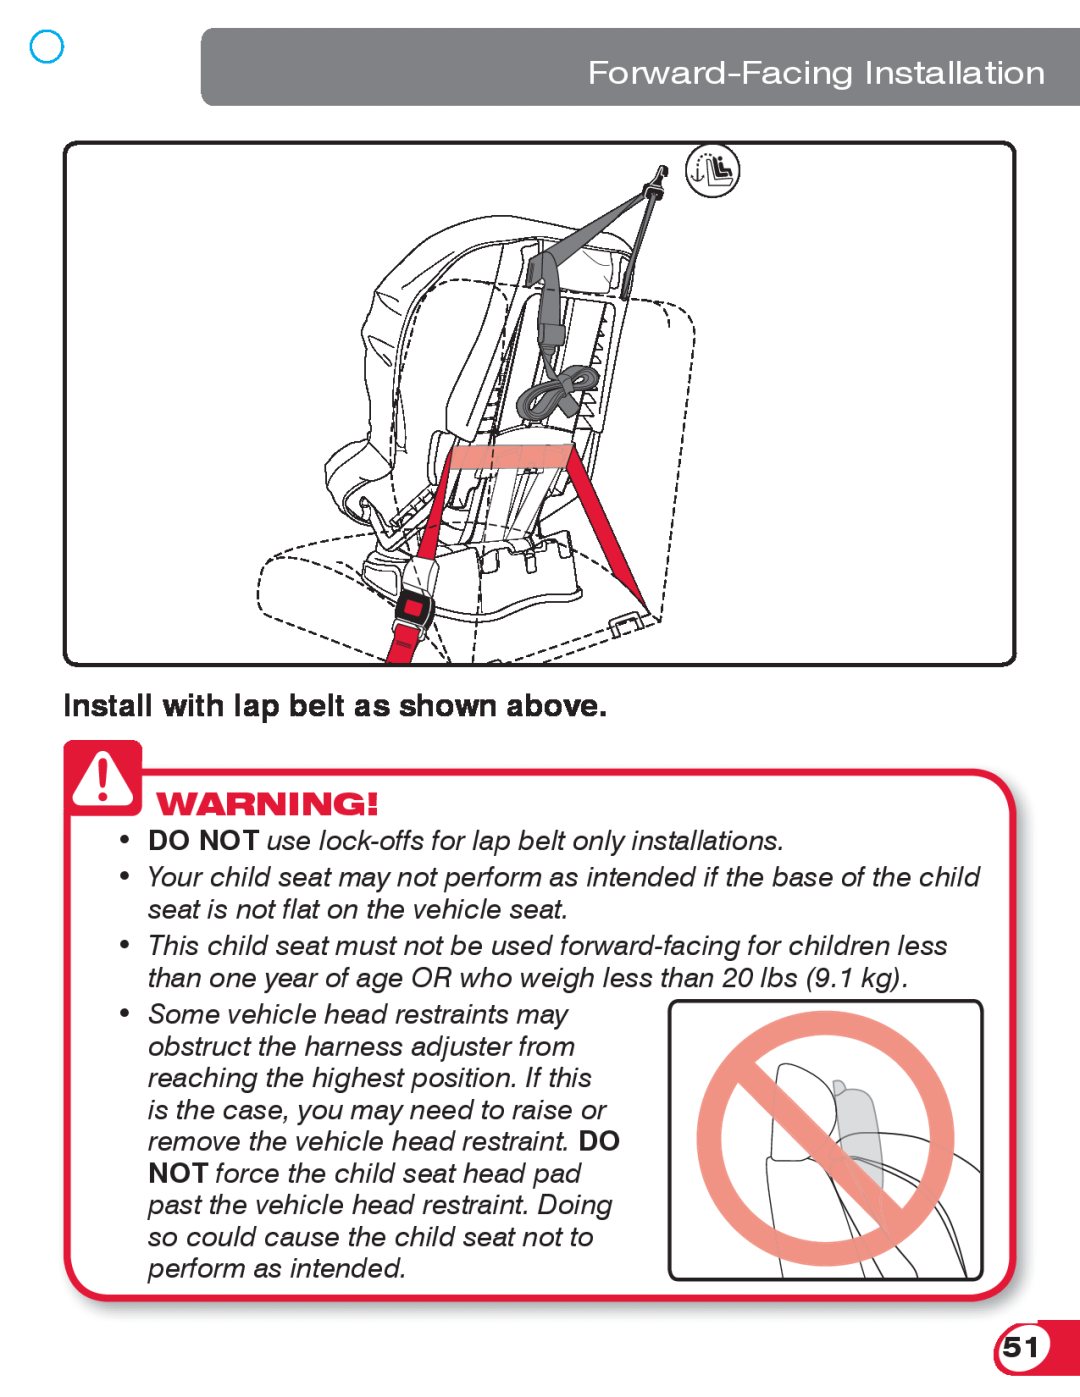 Britax 70 CS manual Forward-Facing Installation, Install with lap belt as shown above 